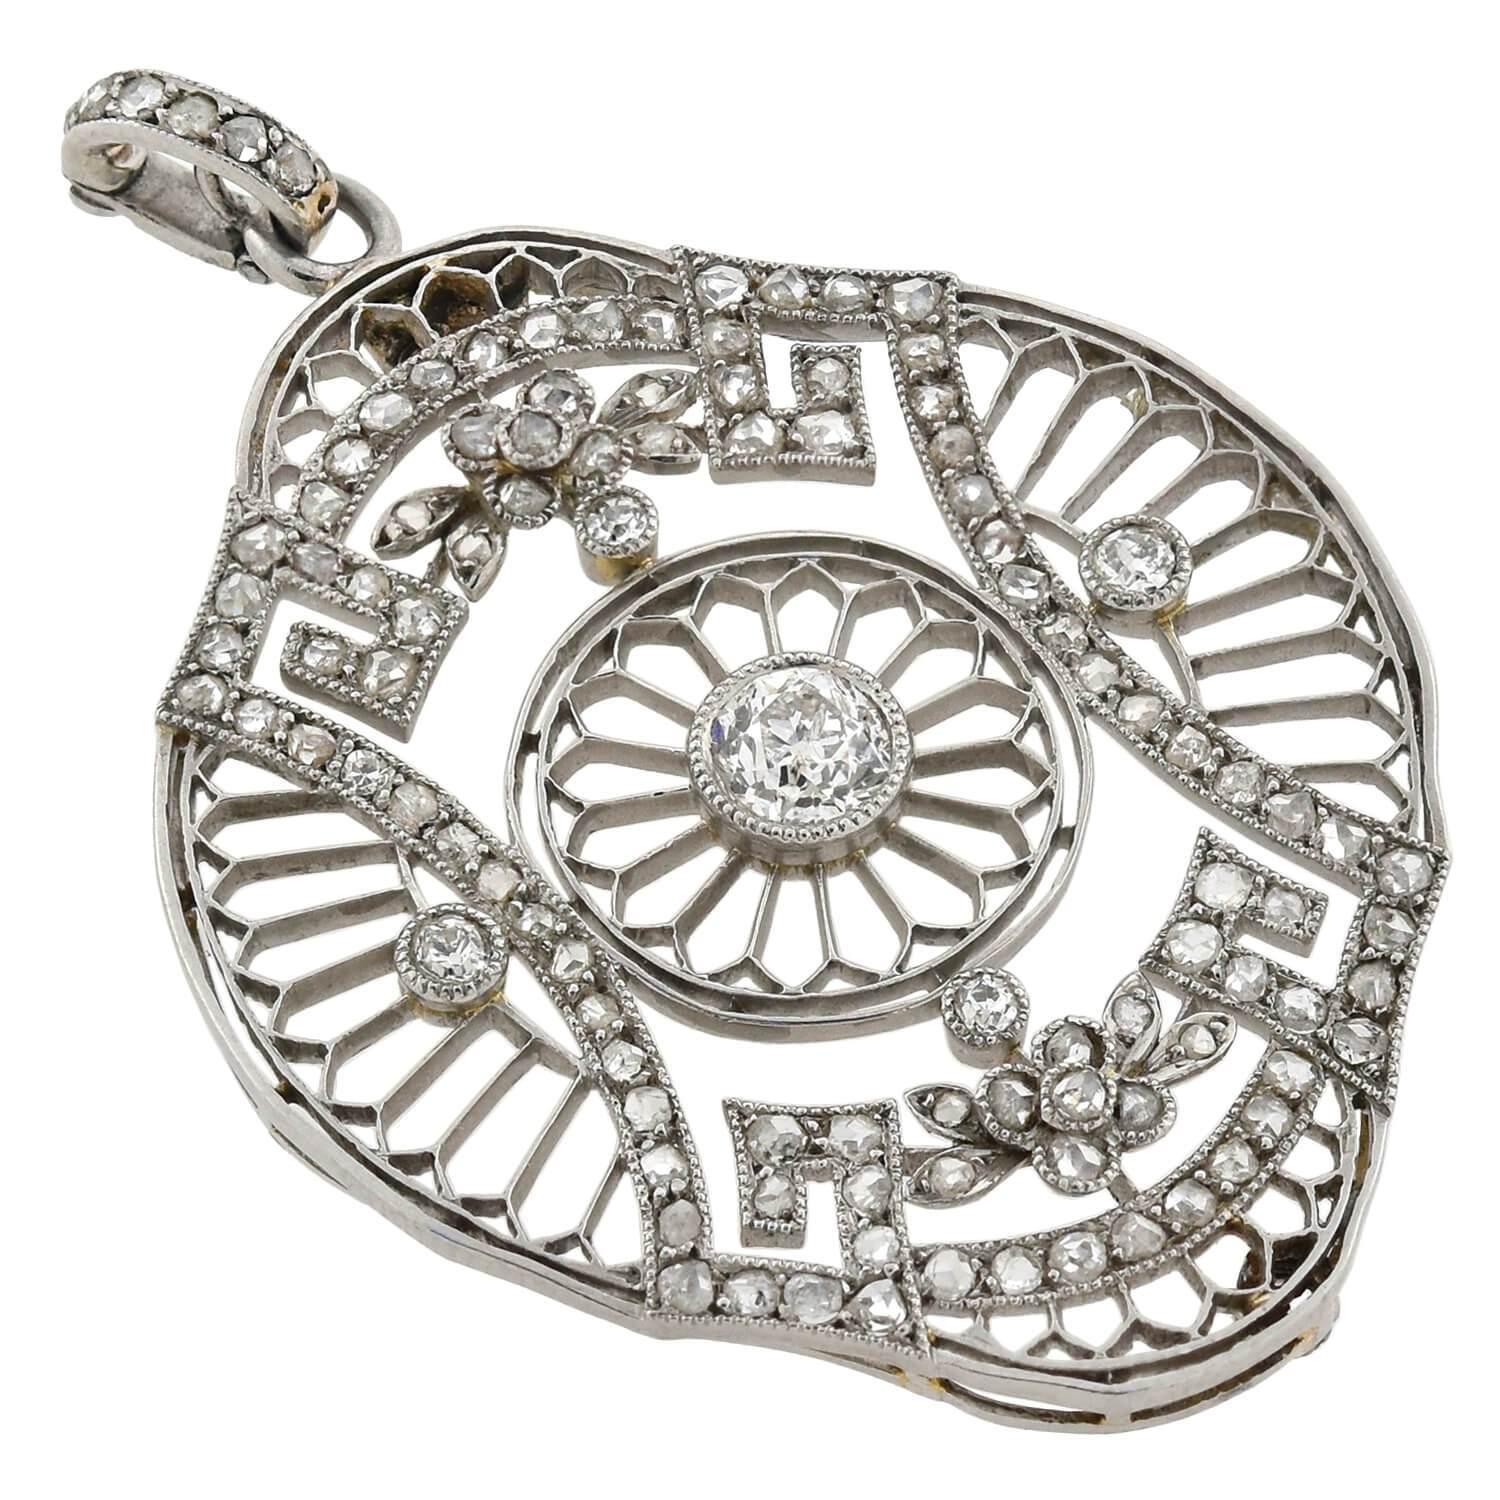 A stunning filigree pendant from the Edwardian (ca1910s) era! This gorgeous French made piece is crafted in platinum and adorns a beautiful 0.55ct old Mine Cut diamond surrounded by feminine wirework in a floral motif. The pendant, which is